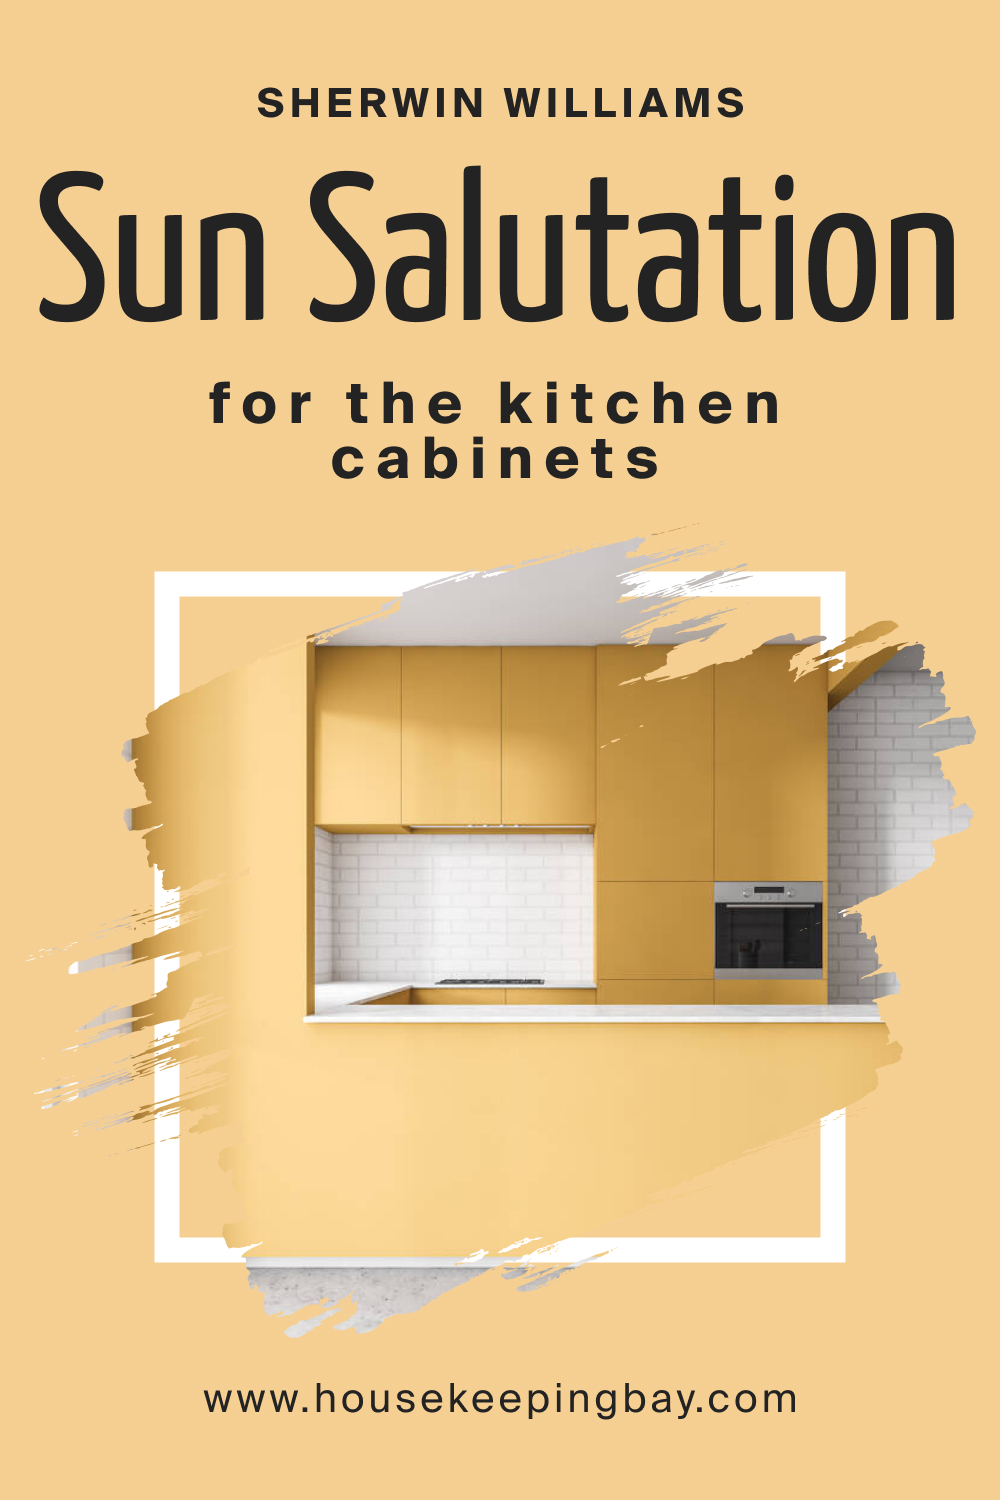 Sherwin Williams. Sun Salutation SW 9664 For the Kitchen Cabinets